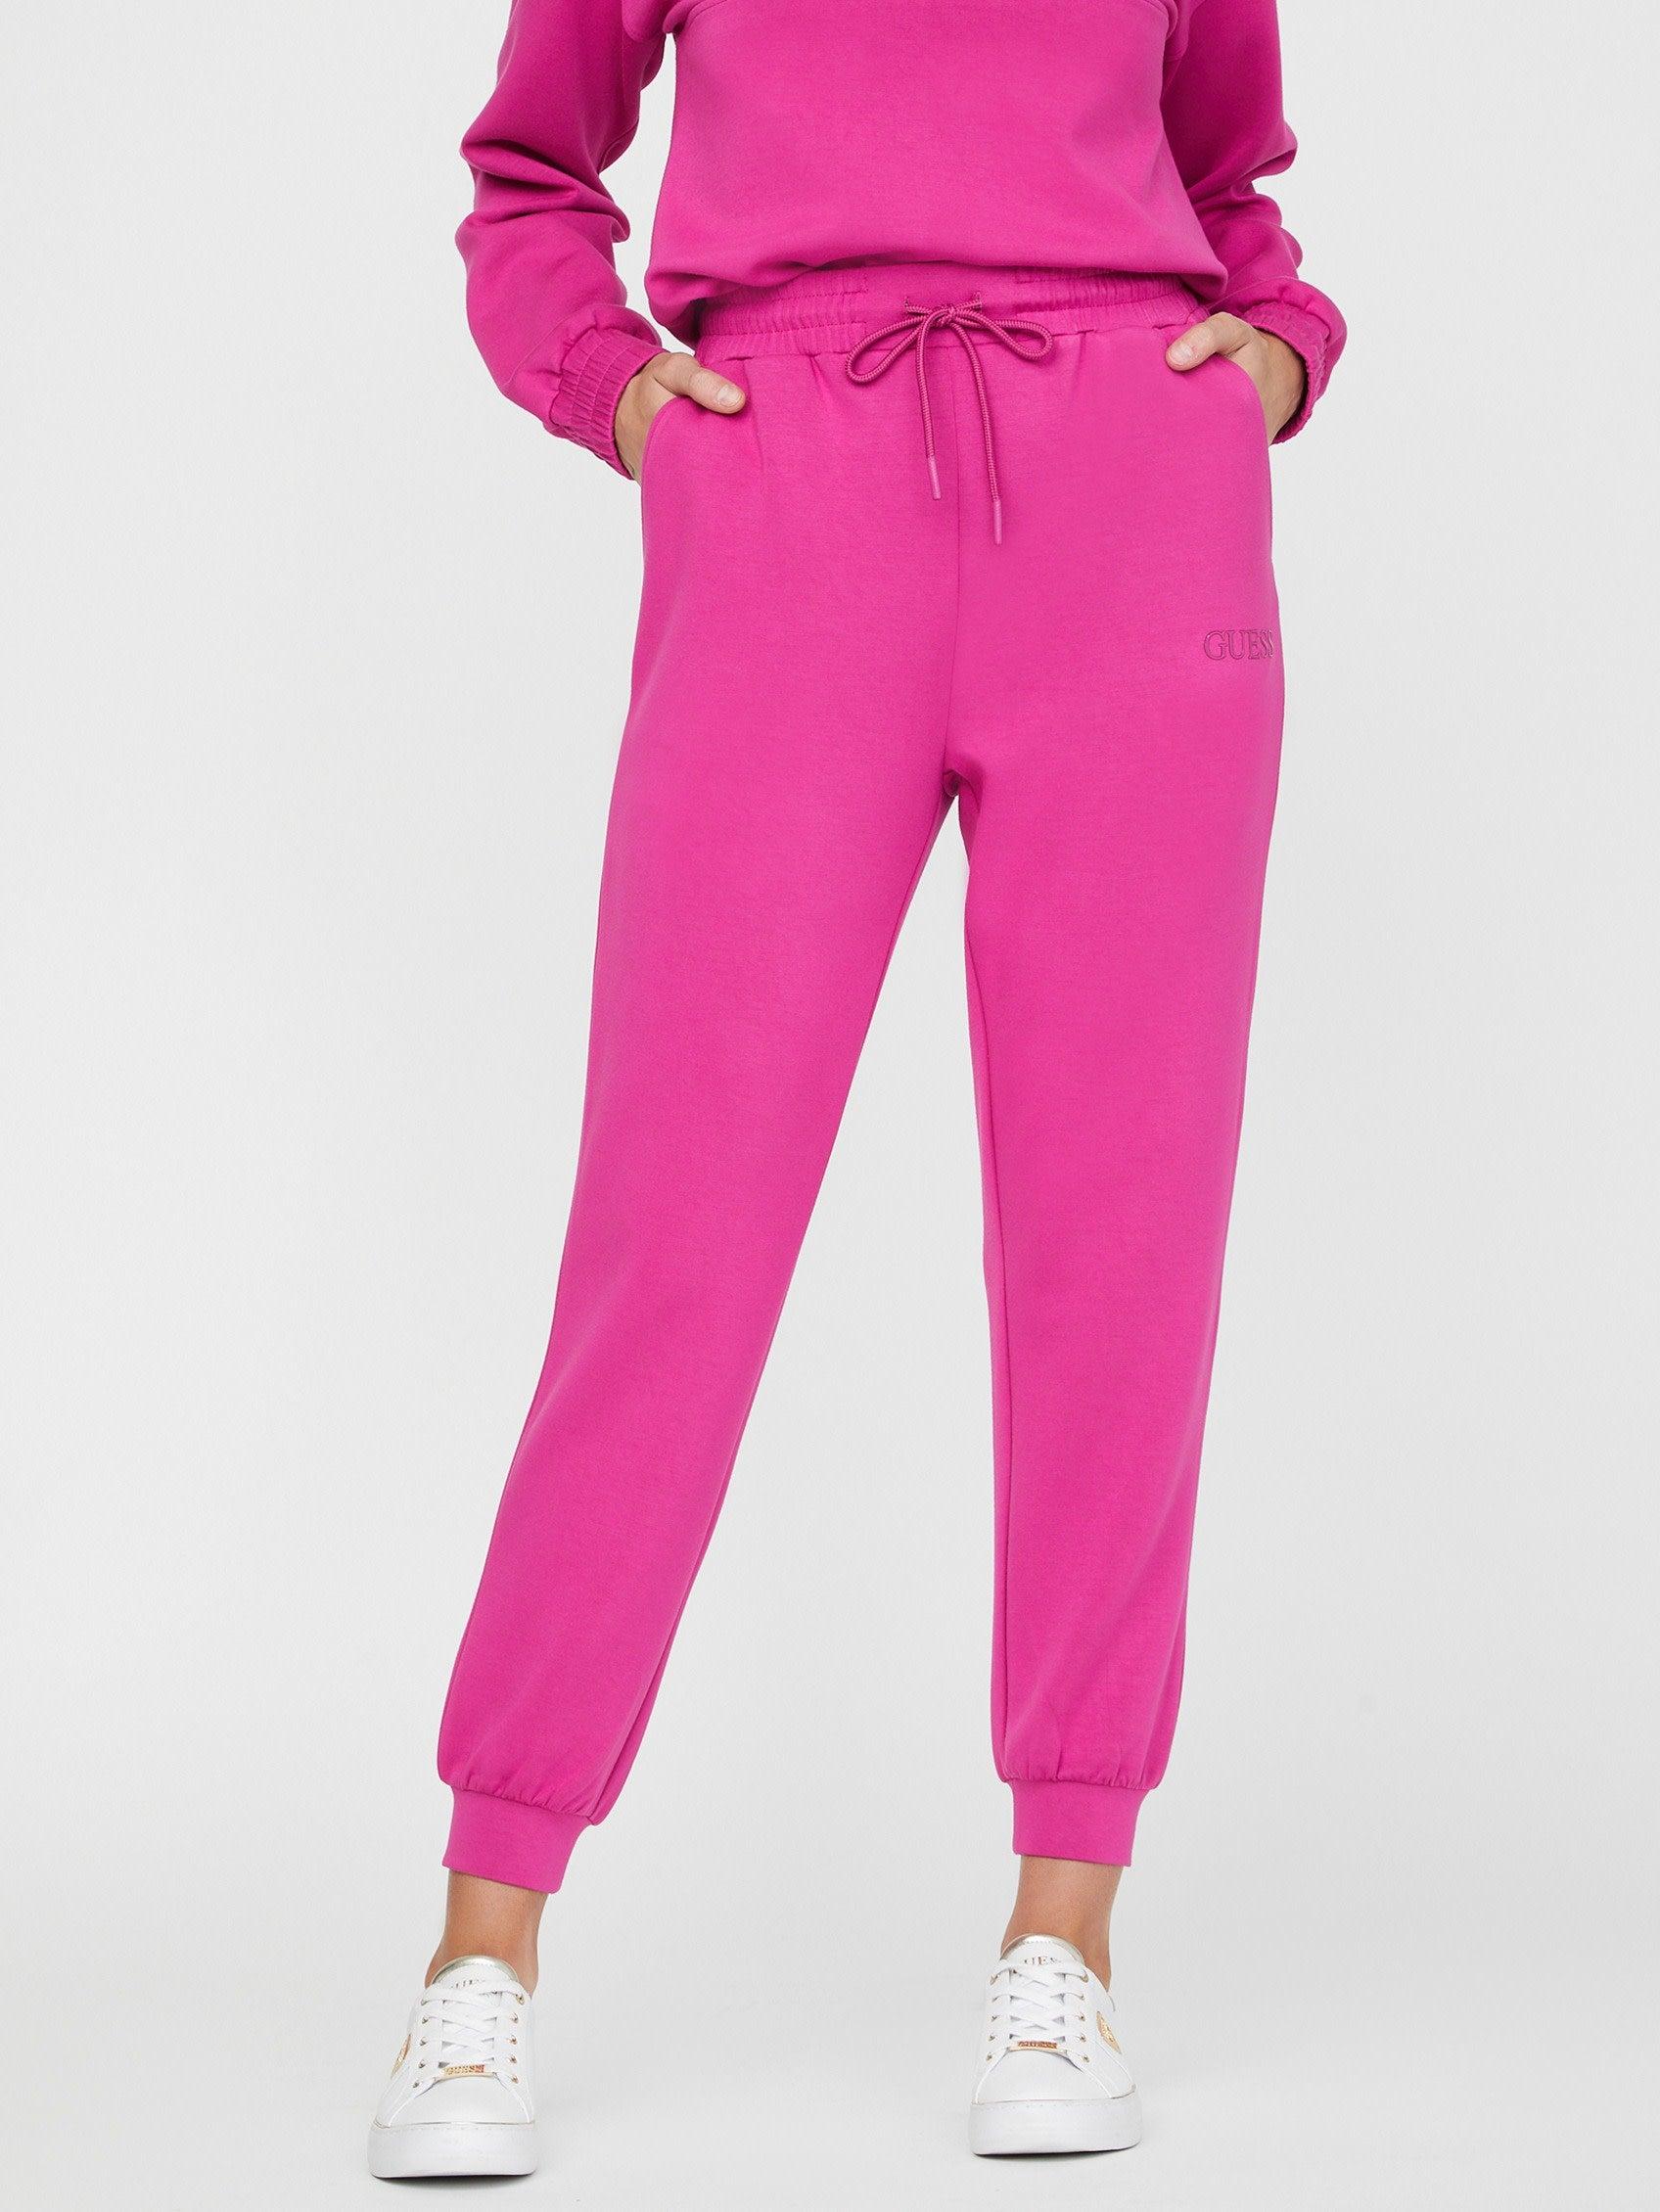 Guess Factory Jessika Jogger Pants in Pink | Lyst